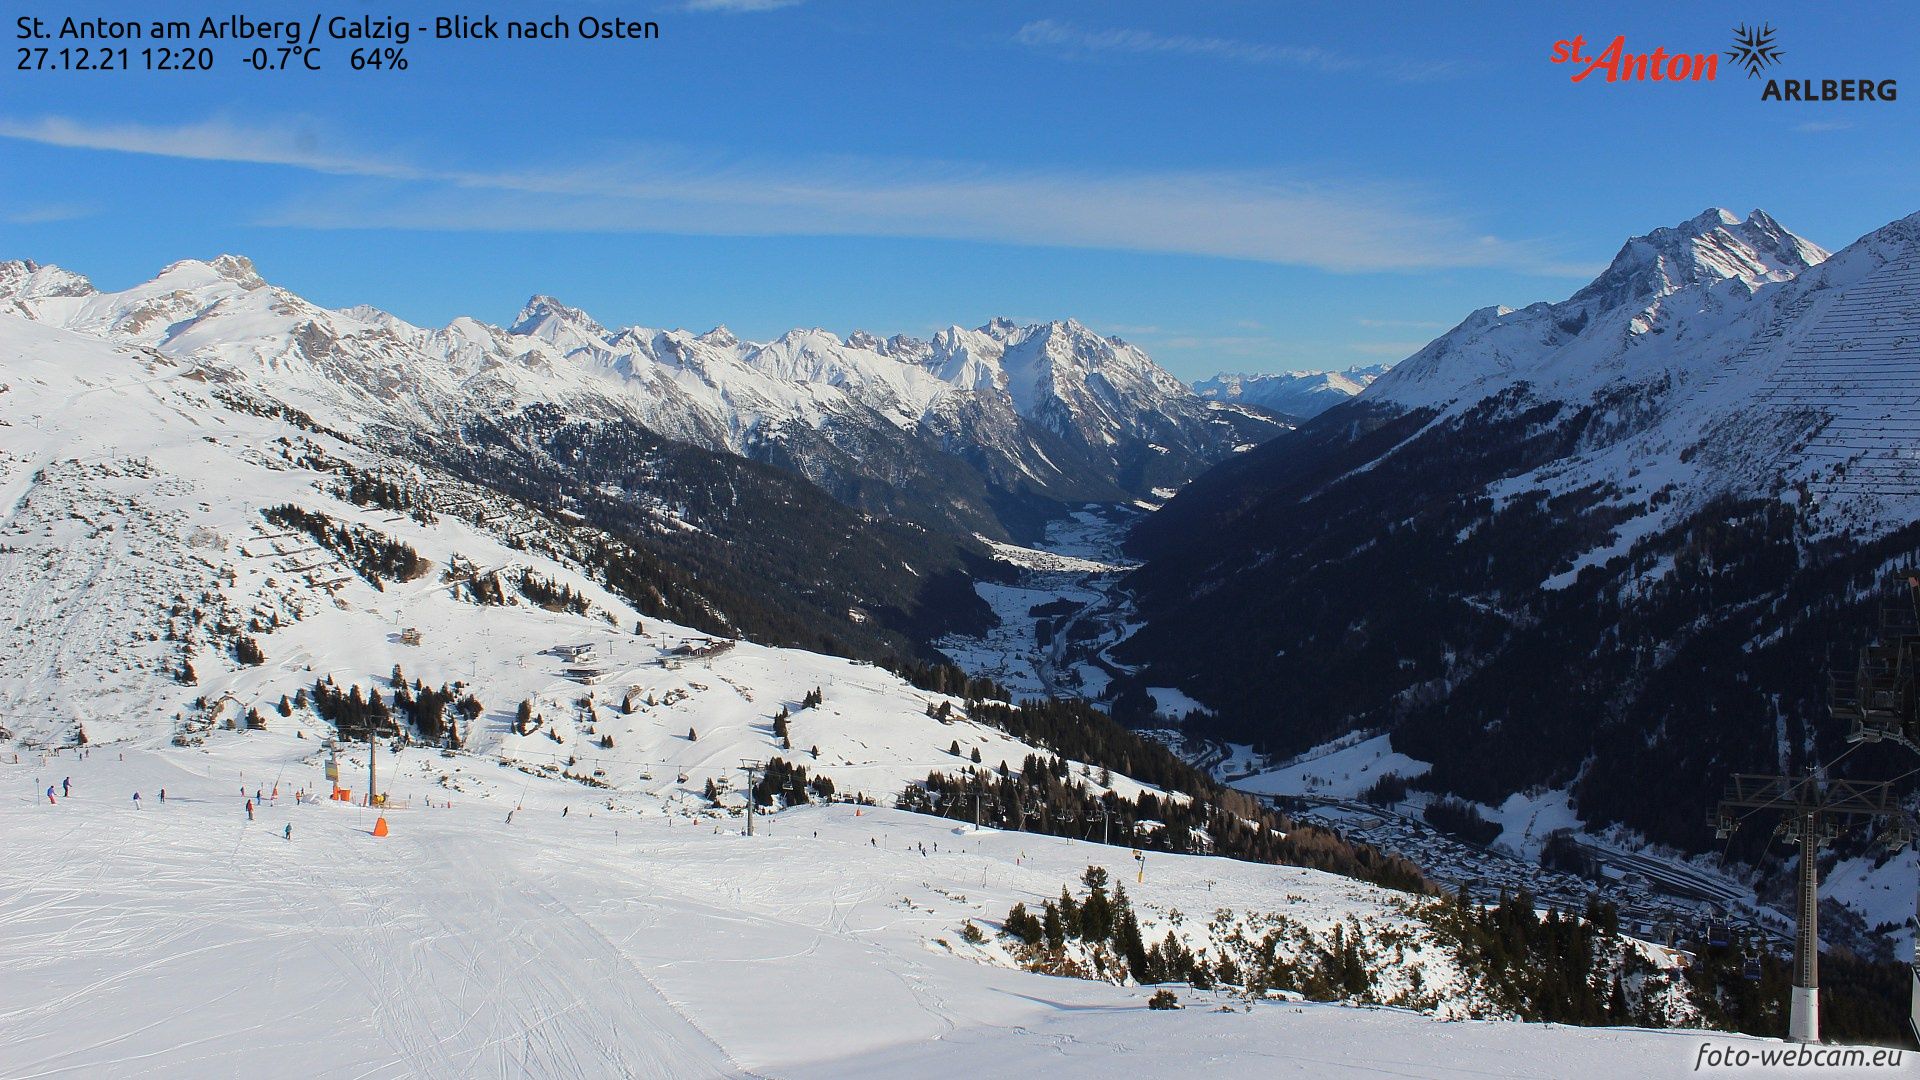 Still calm and sunny in Sankt Anton, but also here it will rain later this week (foto-webcam.eu)